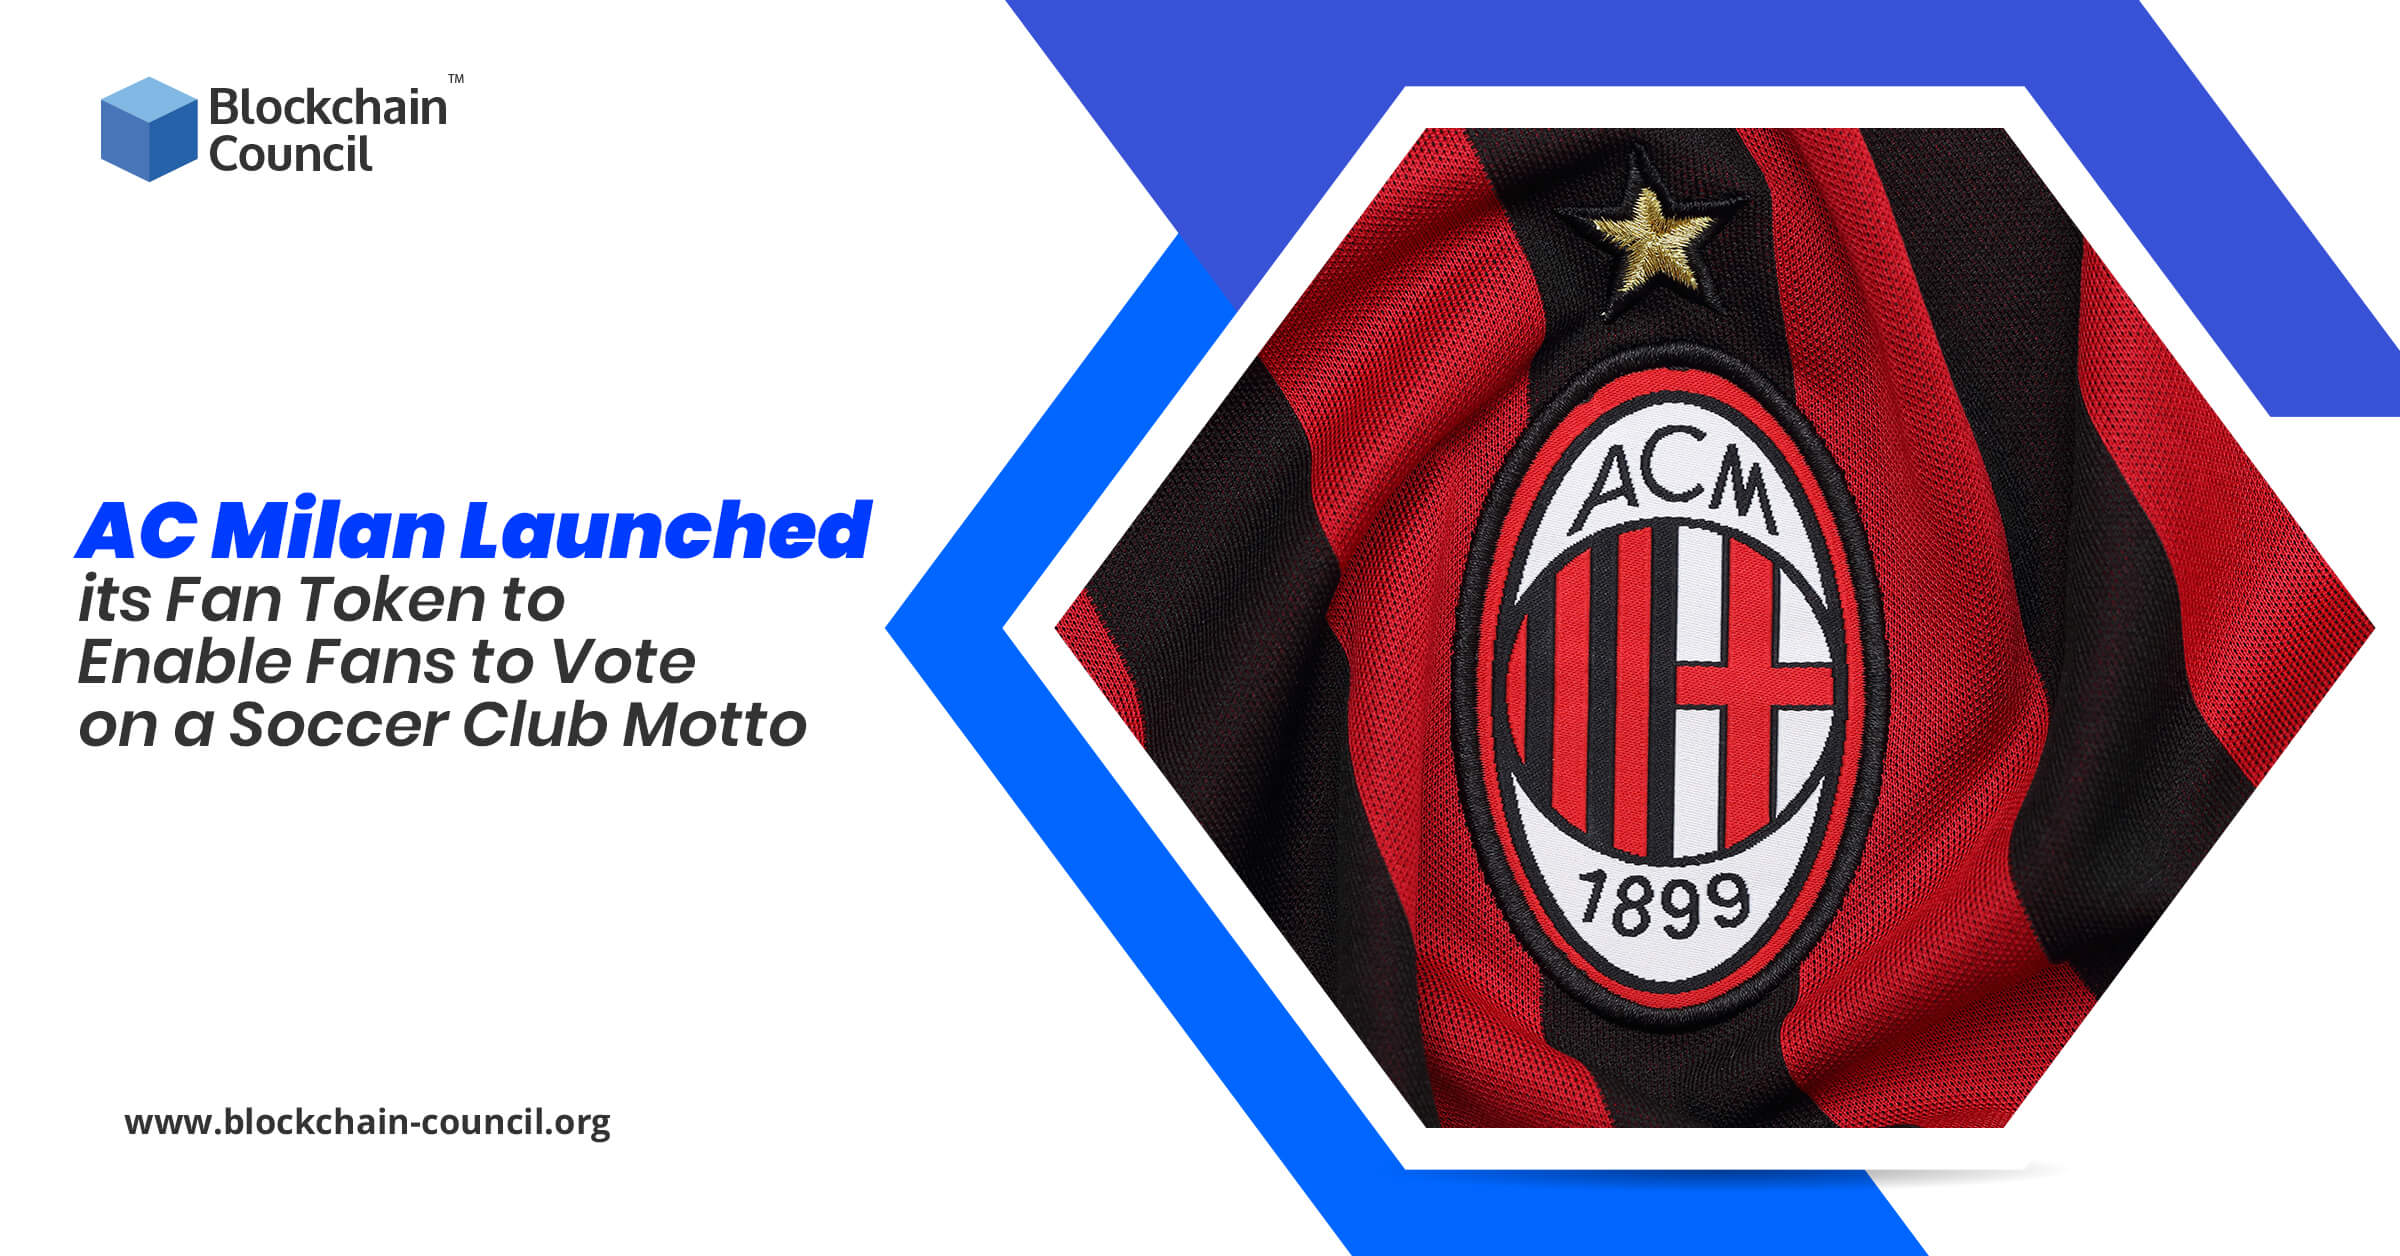 AC Milan Launched its Fan Token to Enable Fans to Vote on a Soccer Club Motto